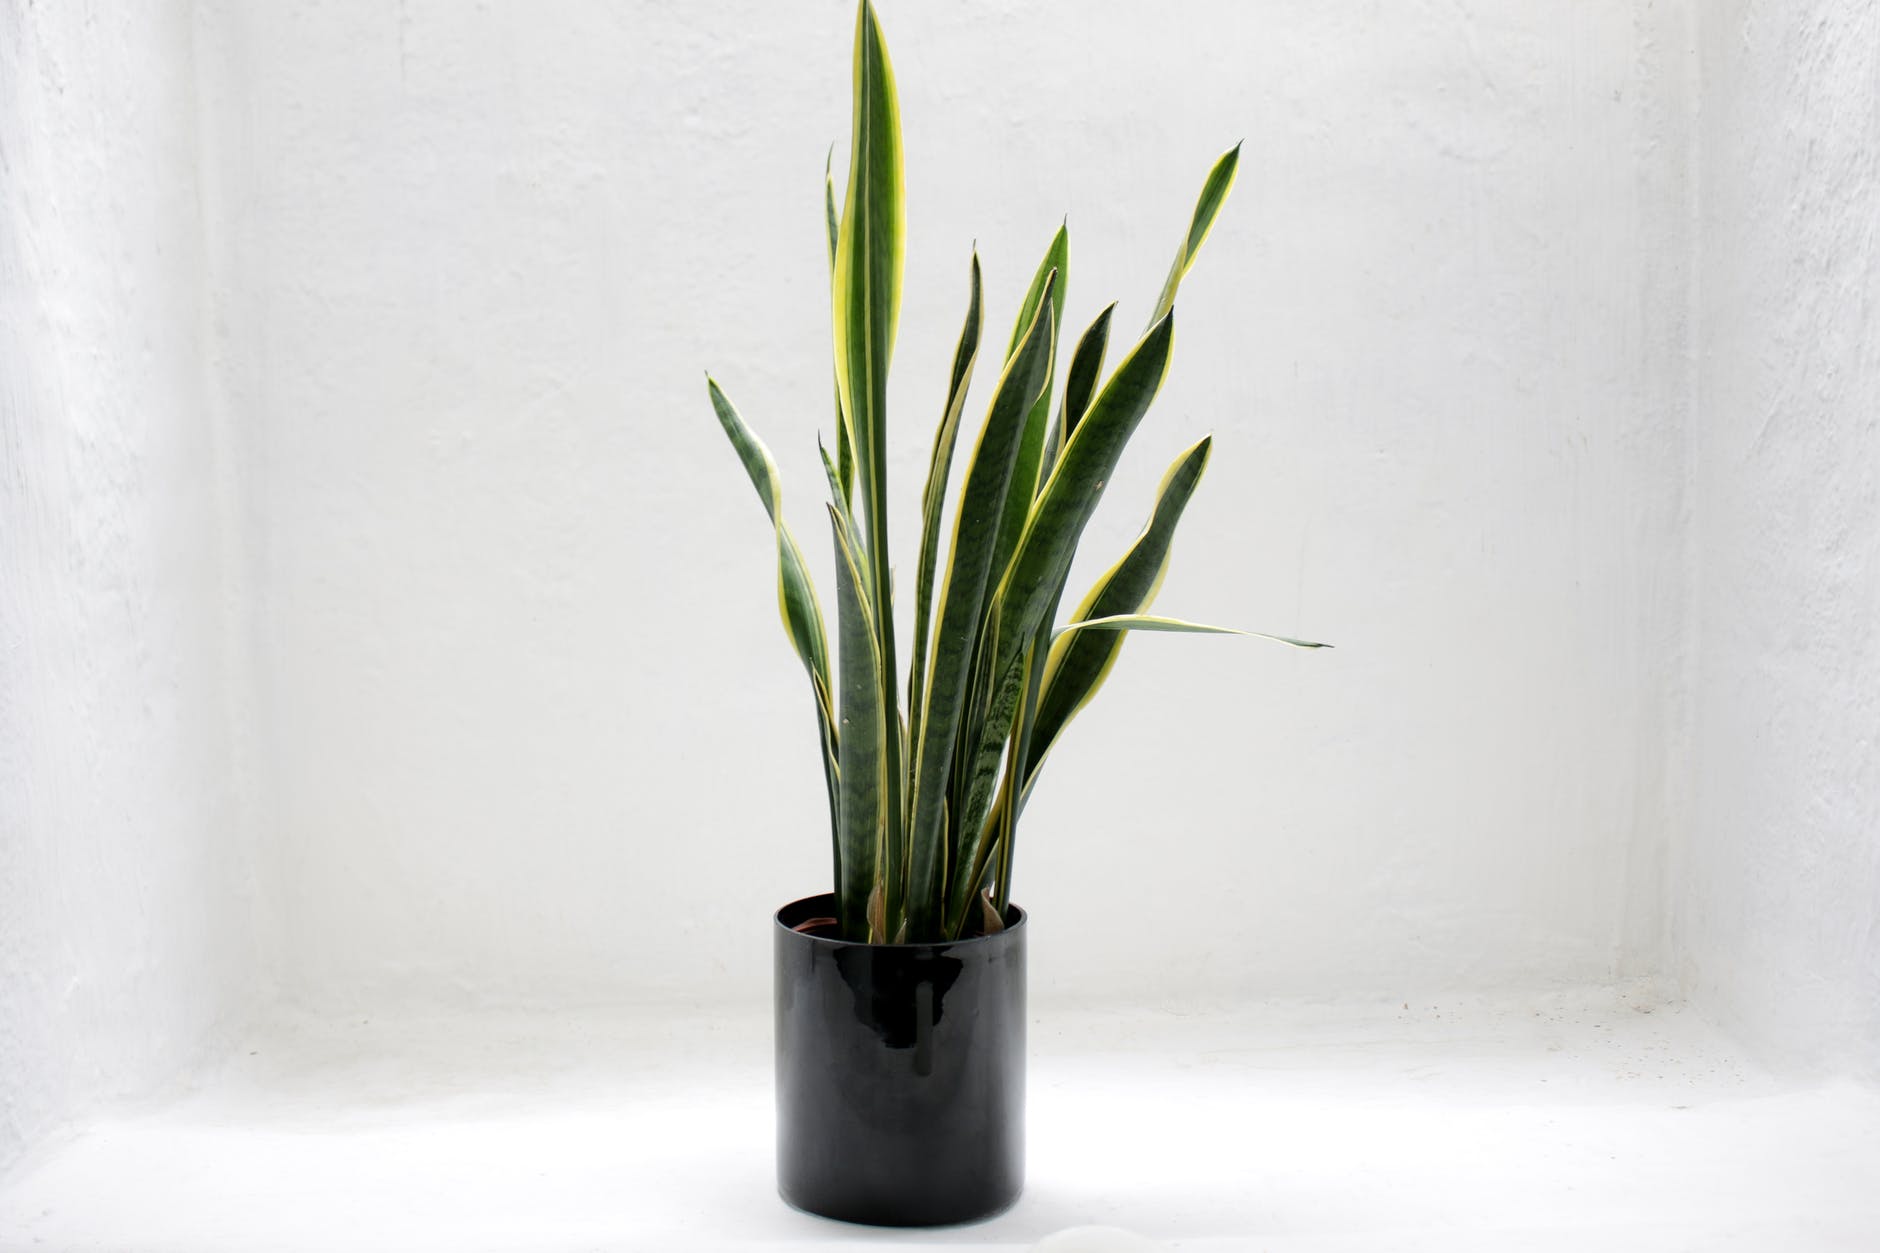 Sansevieria Moonshine Care & Growing Guide